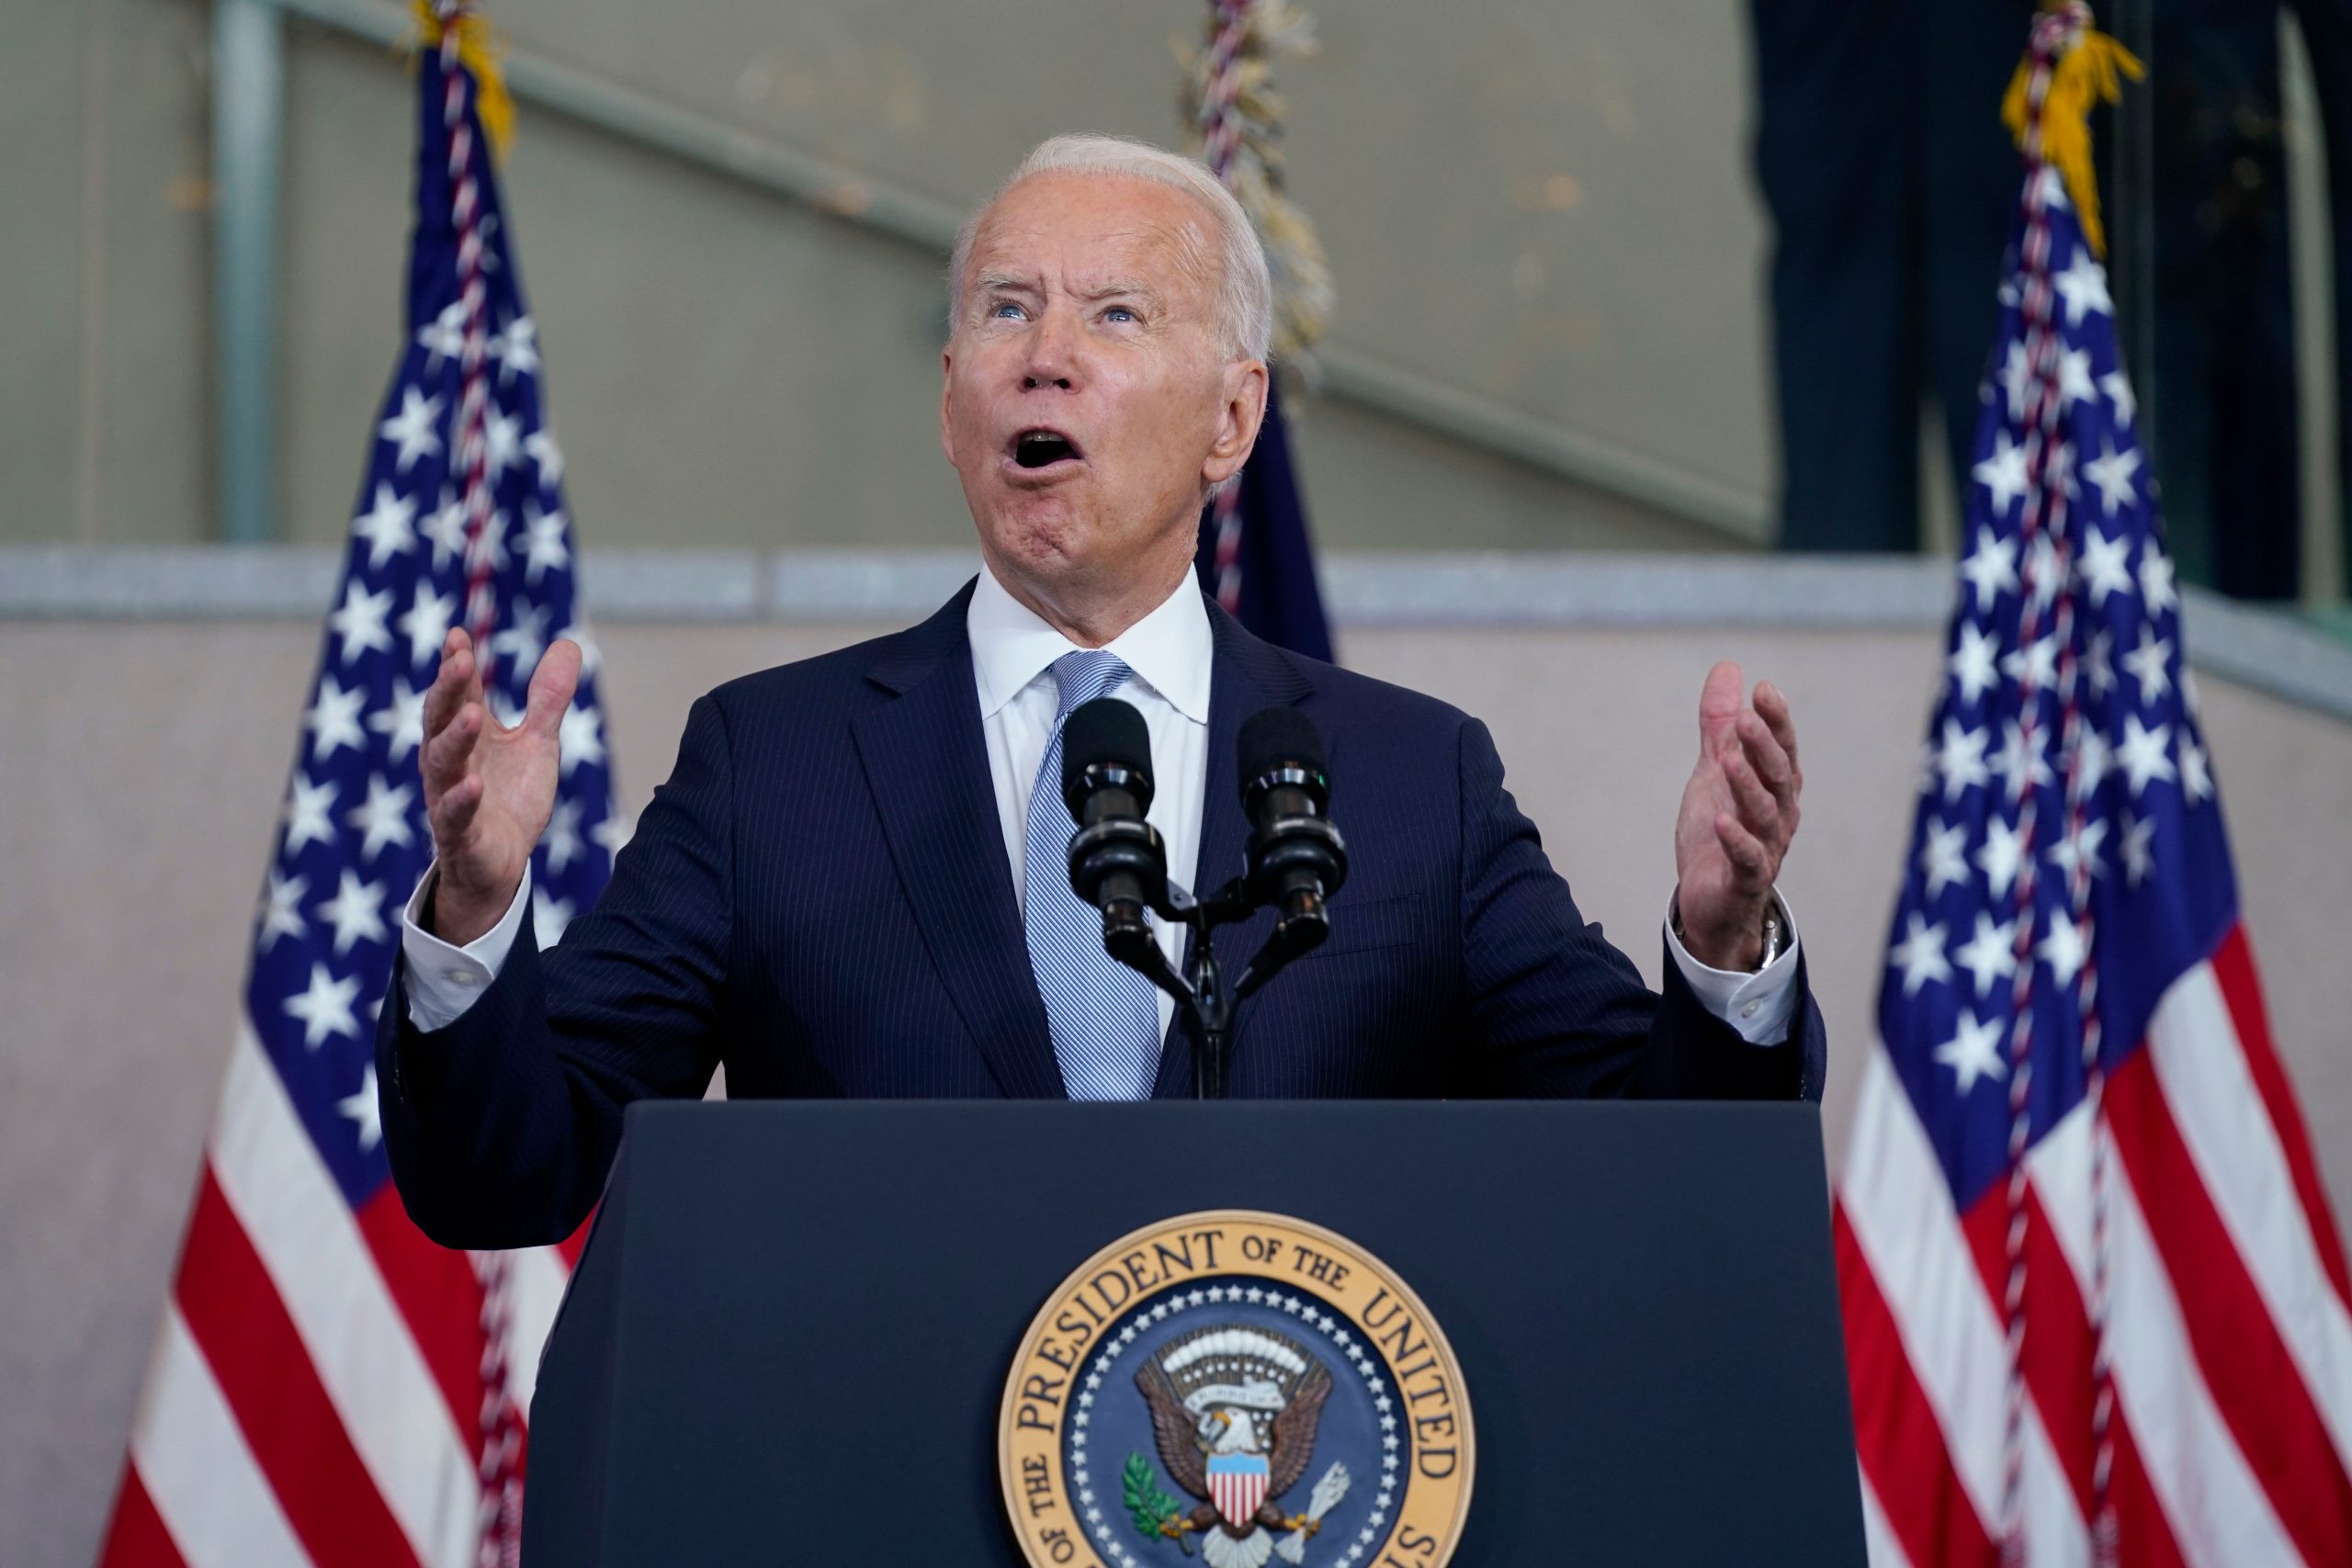 Biden lashes out at China for not dealing with ‘deteriorating’ Hong Kong situation